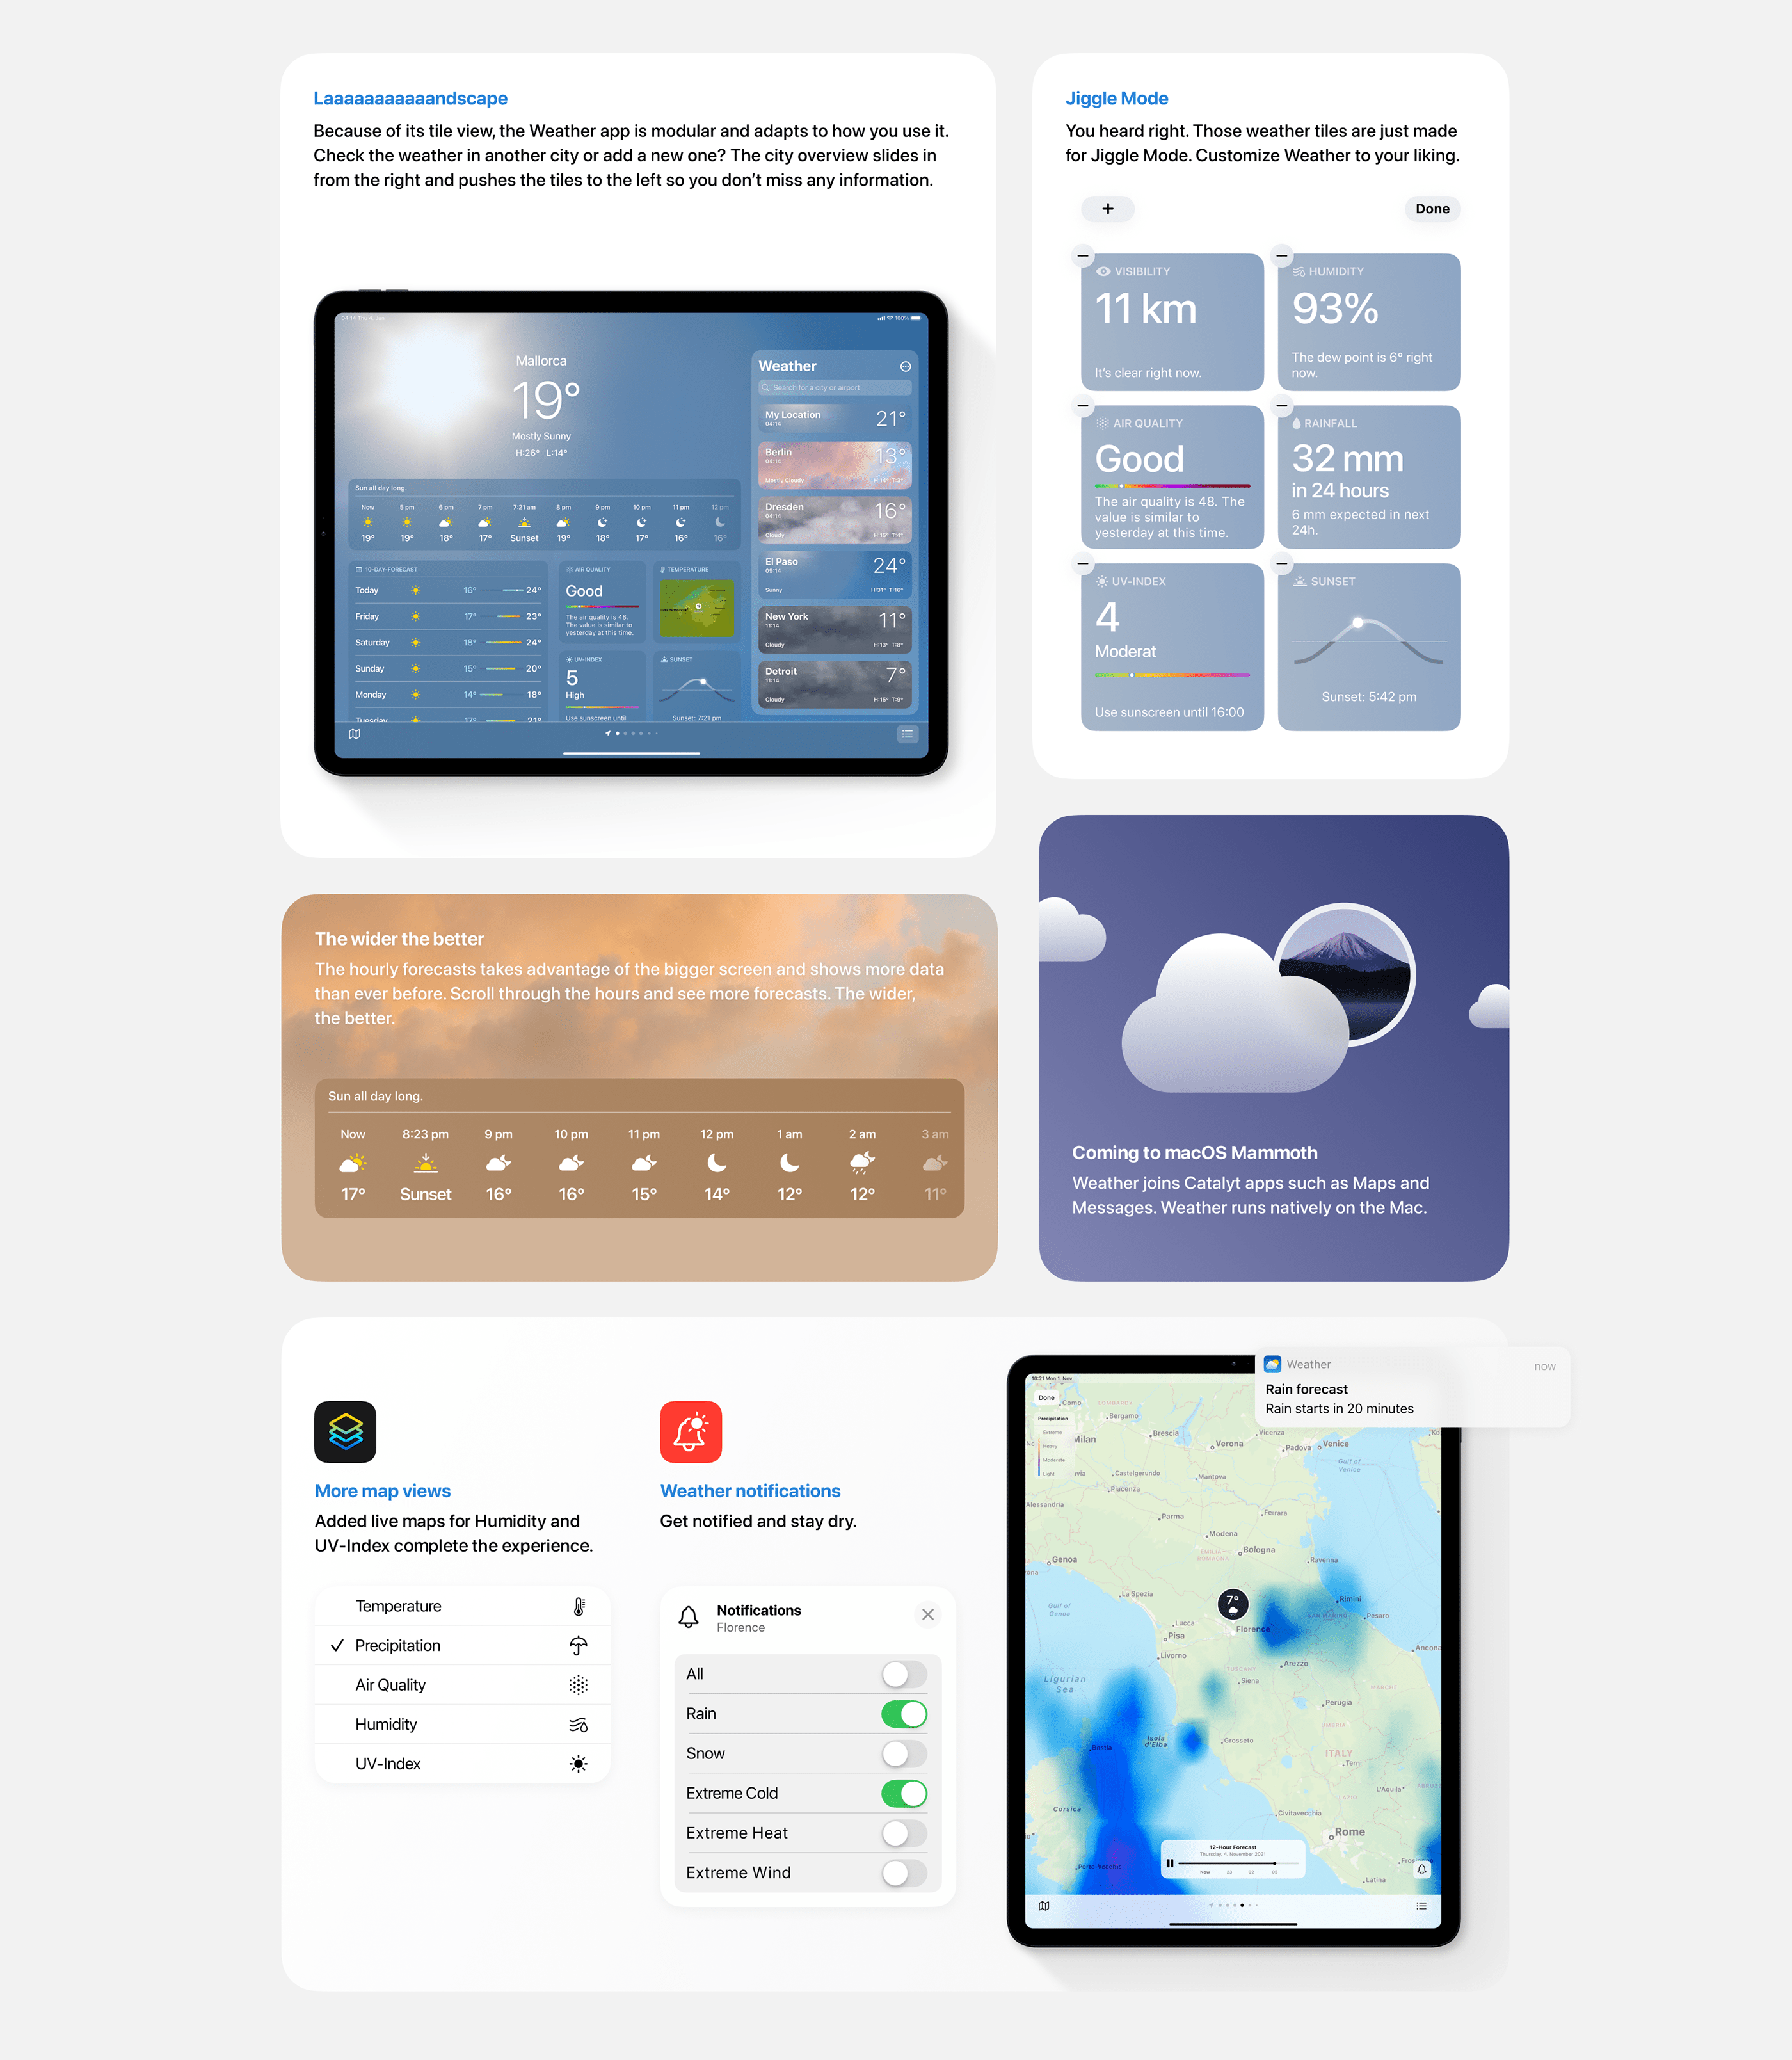 Weather app concept drawing by designer Timo Weigelt - Will Apple ever figure out how to make a weather app for the iPad?